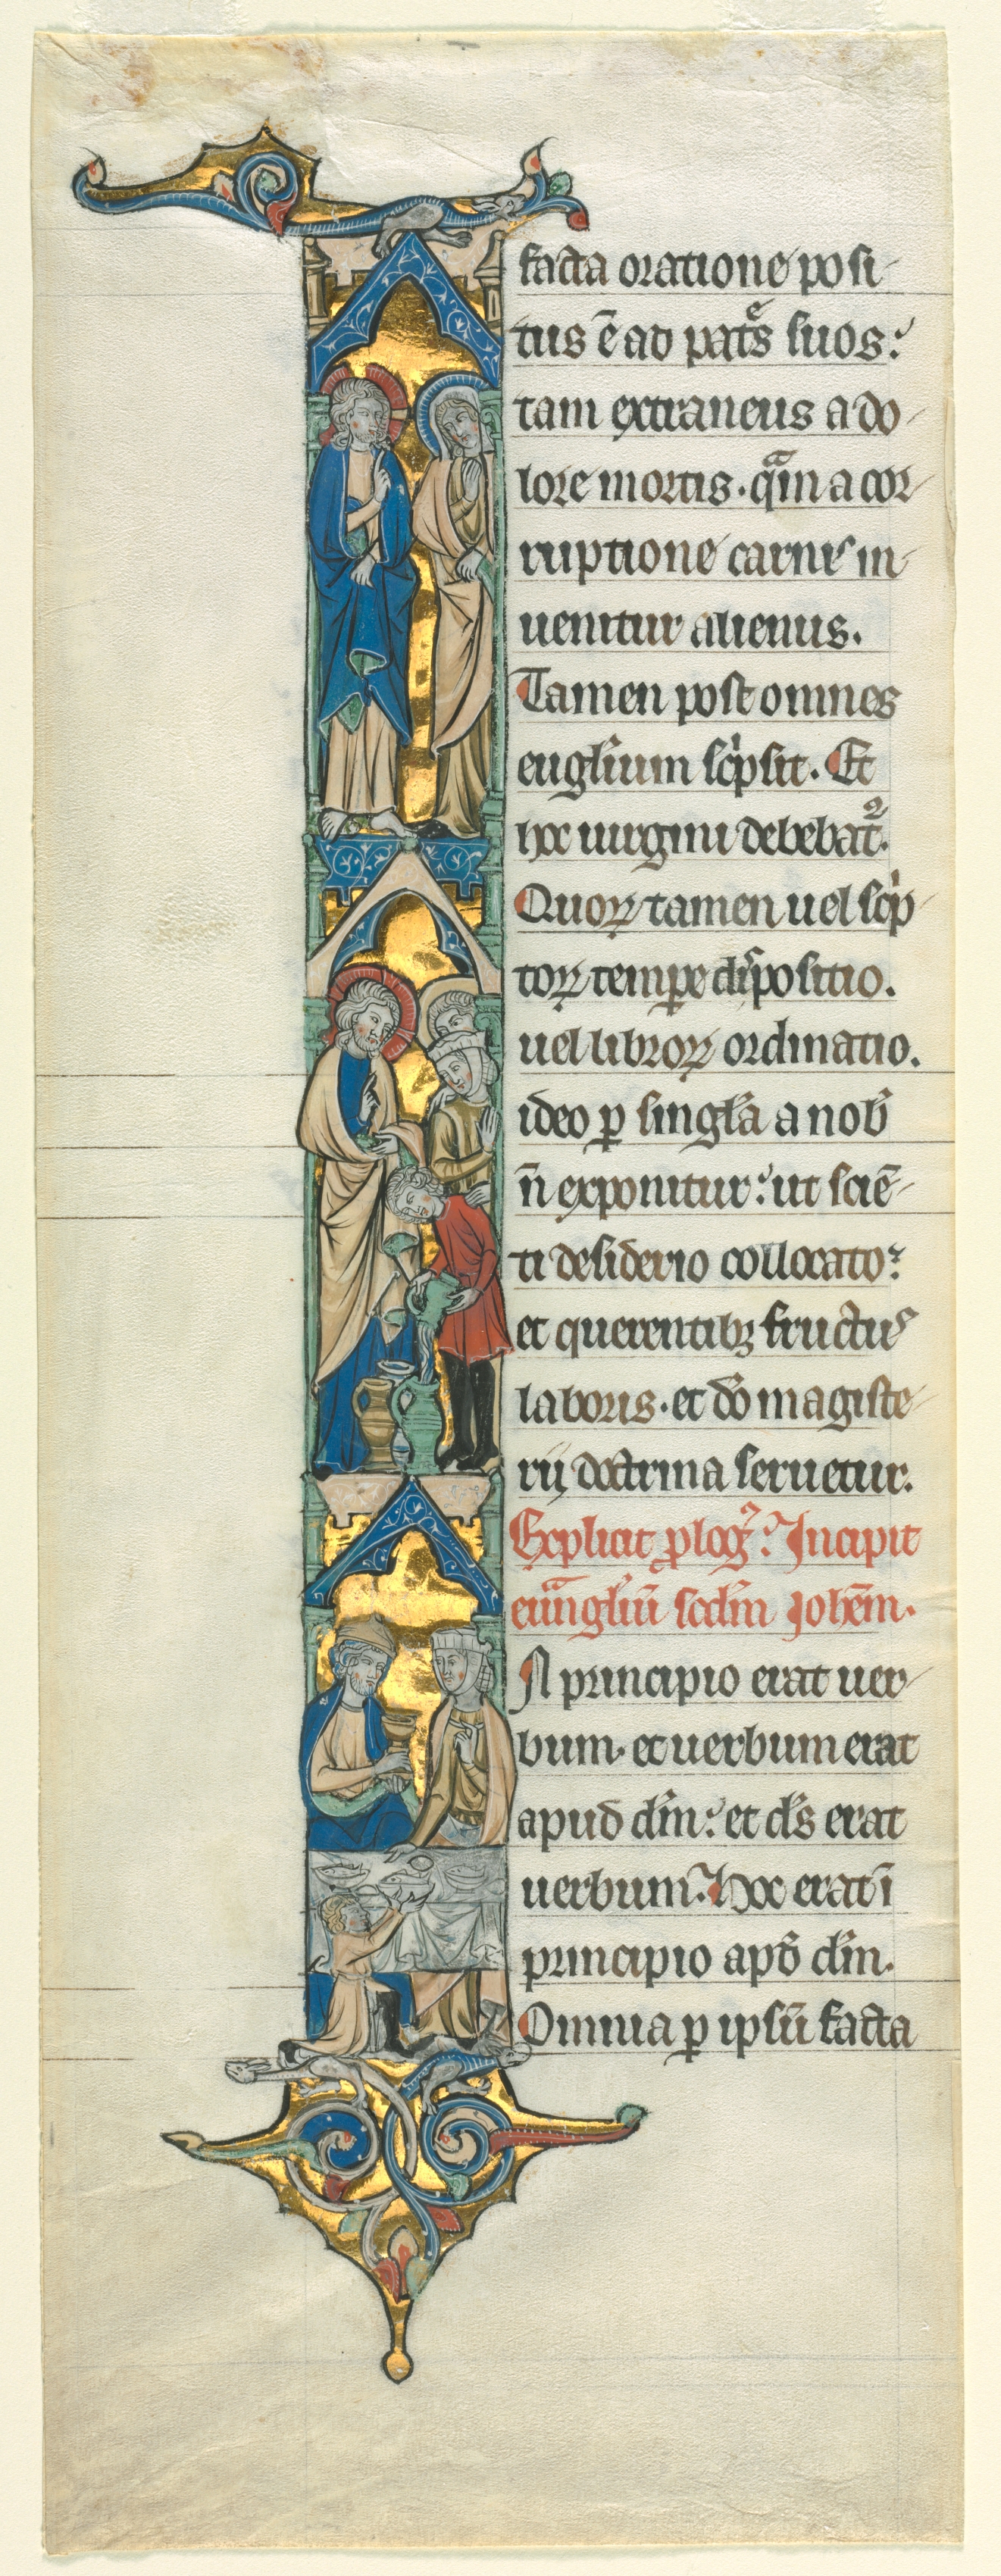 Partial Leaf from a Latin Bible: Initial I[n principio] with the Marriage at Cana